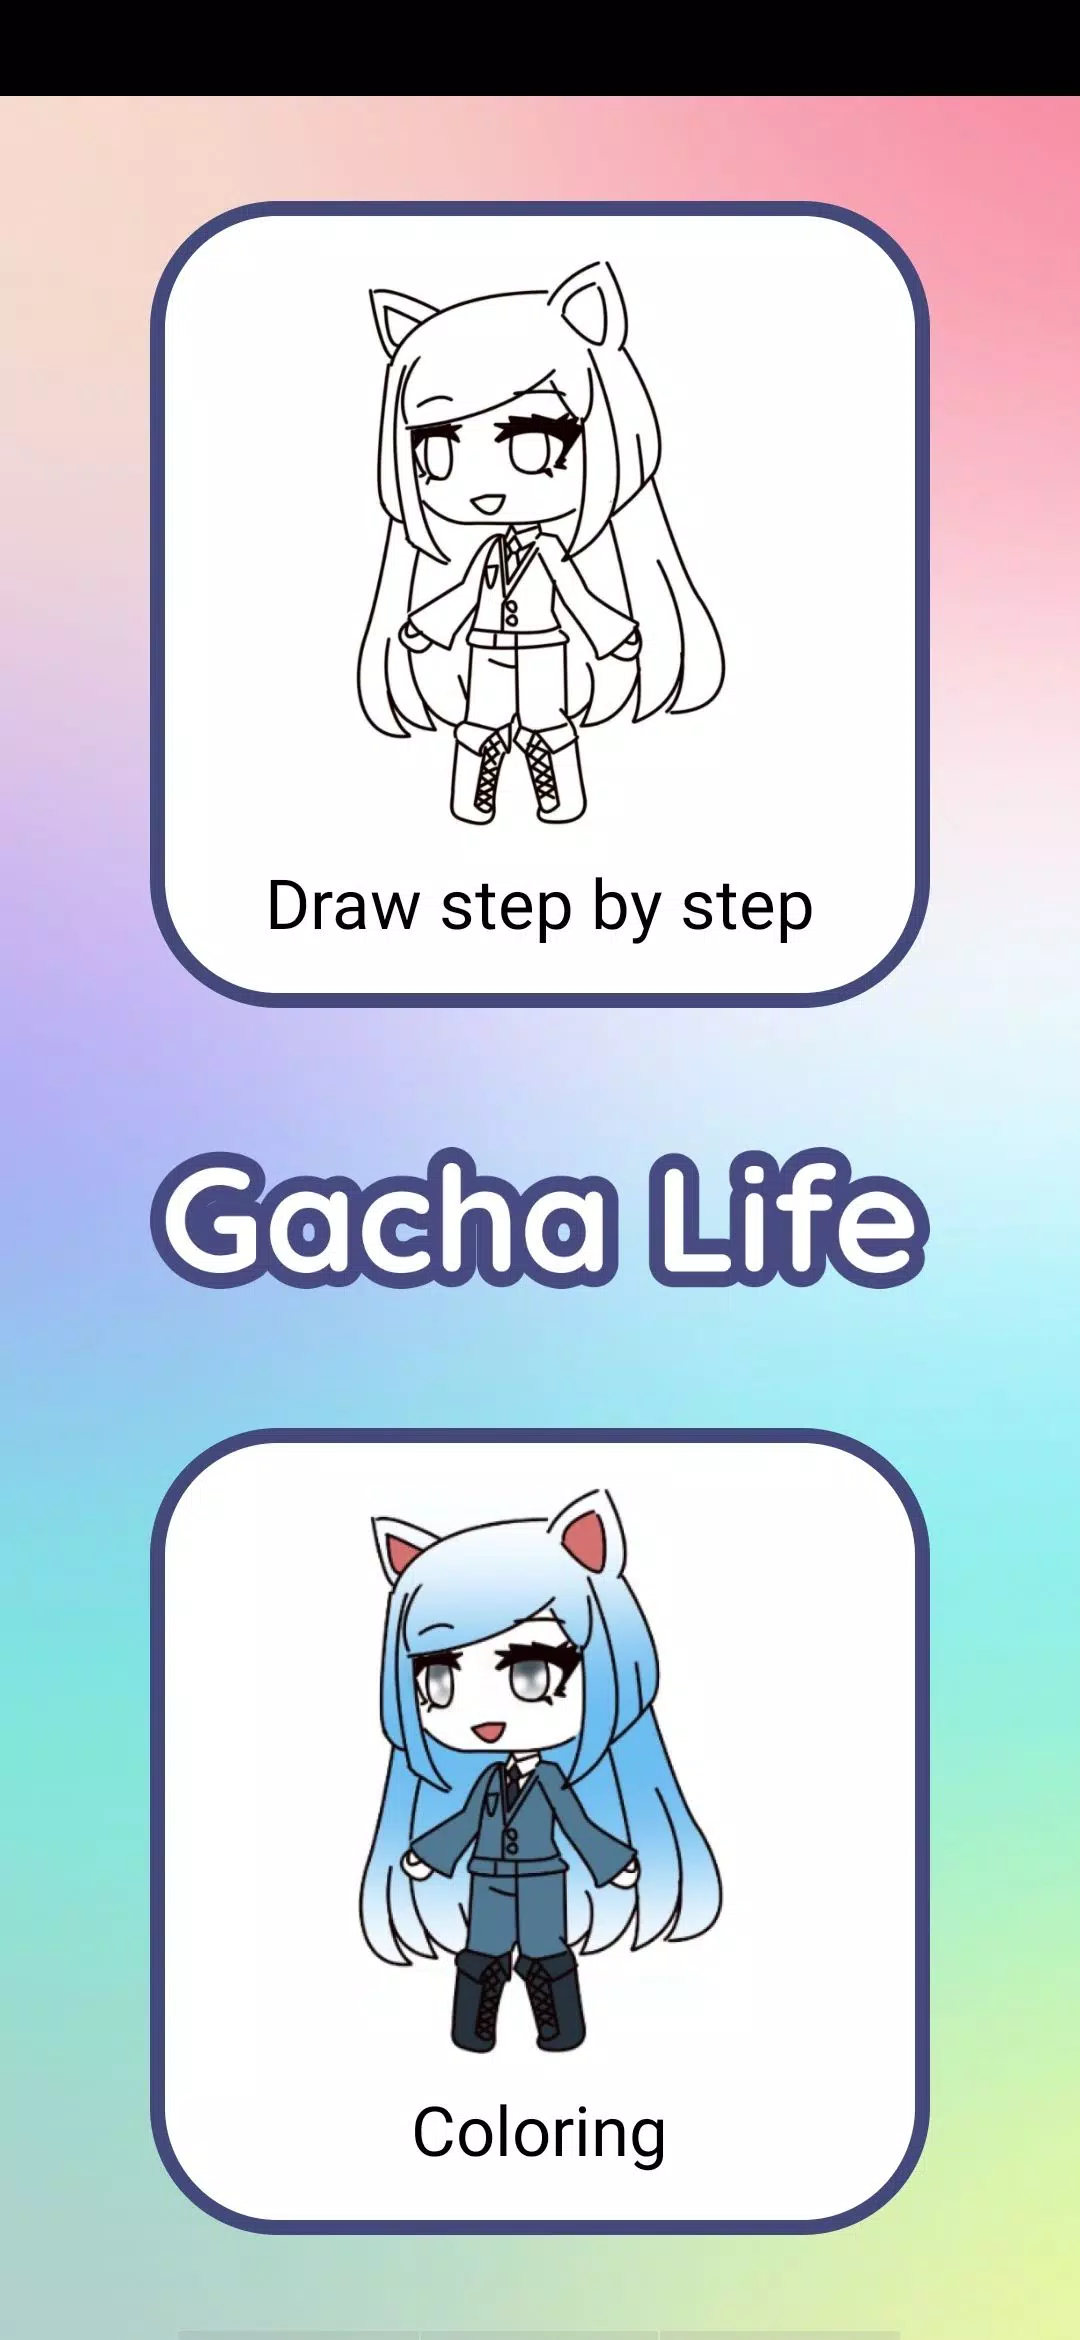 How to draw Gacha step by step - Apps on Google Play